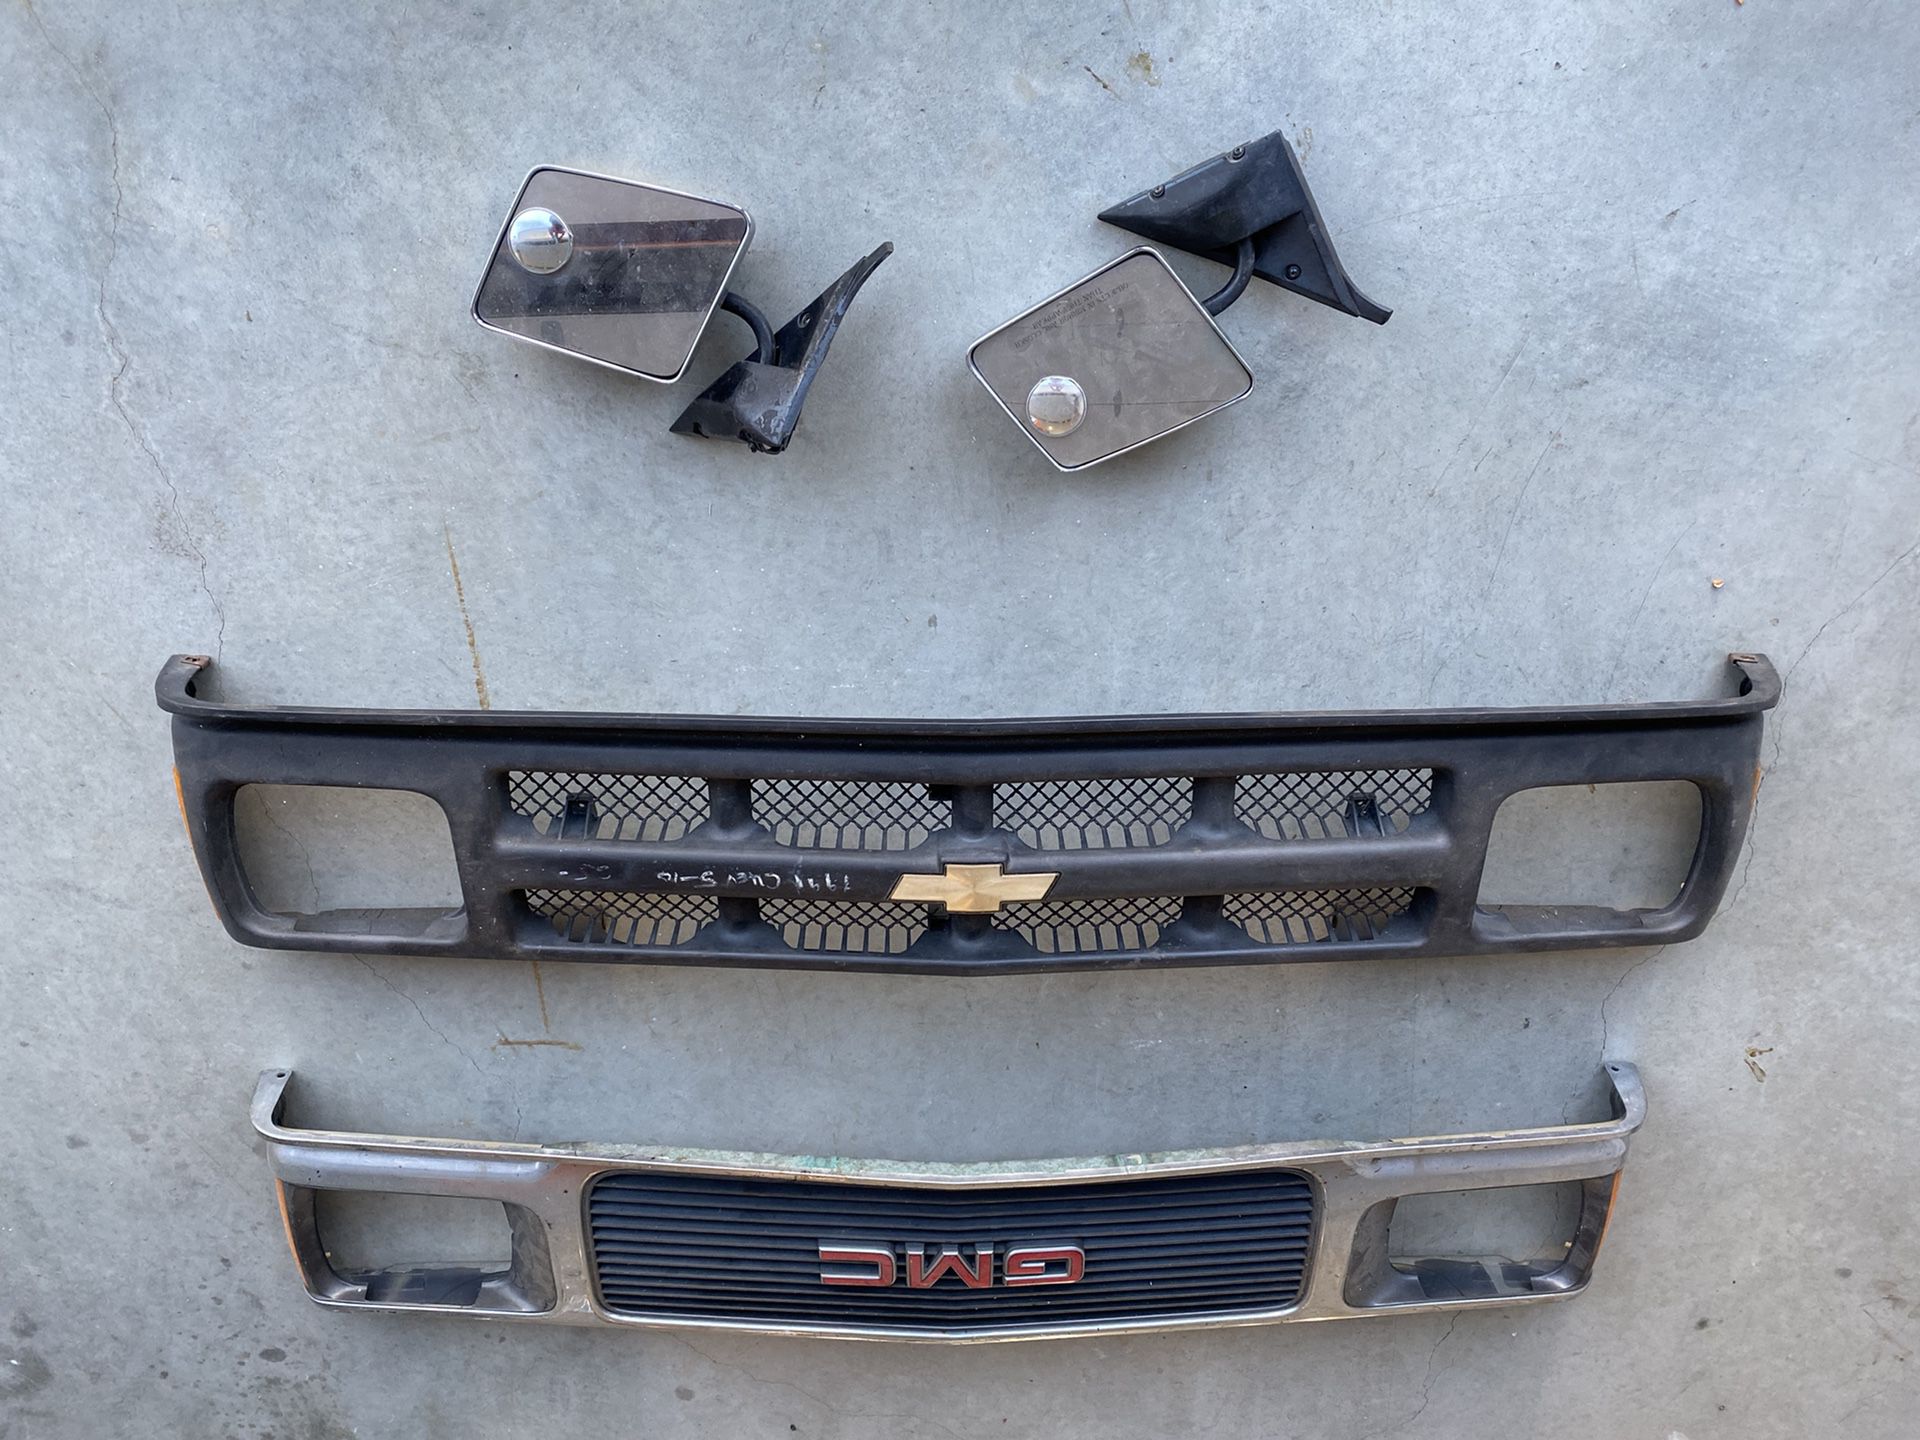 Chevy S10 2nd Generation Parts